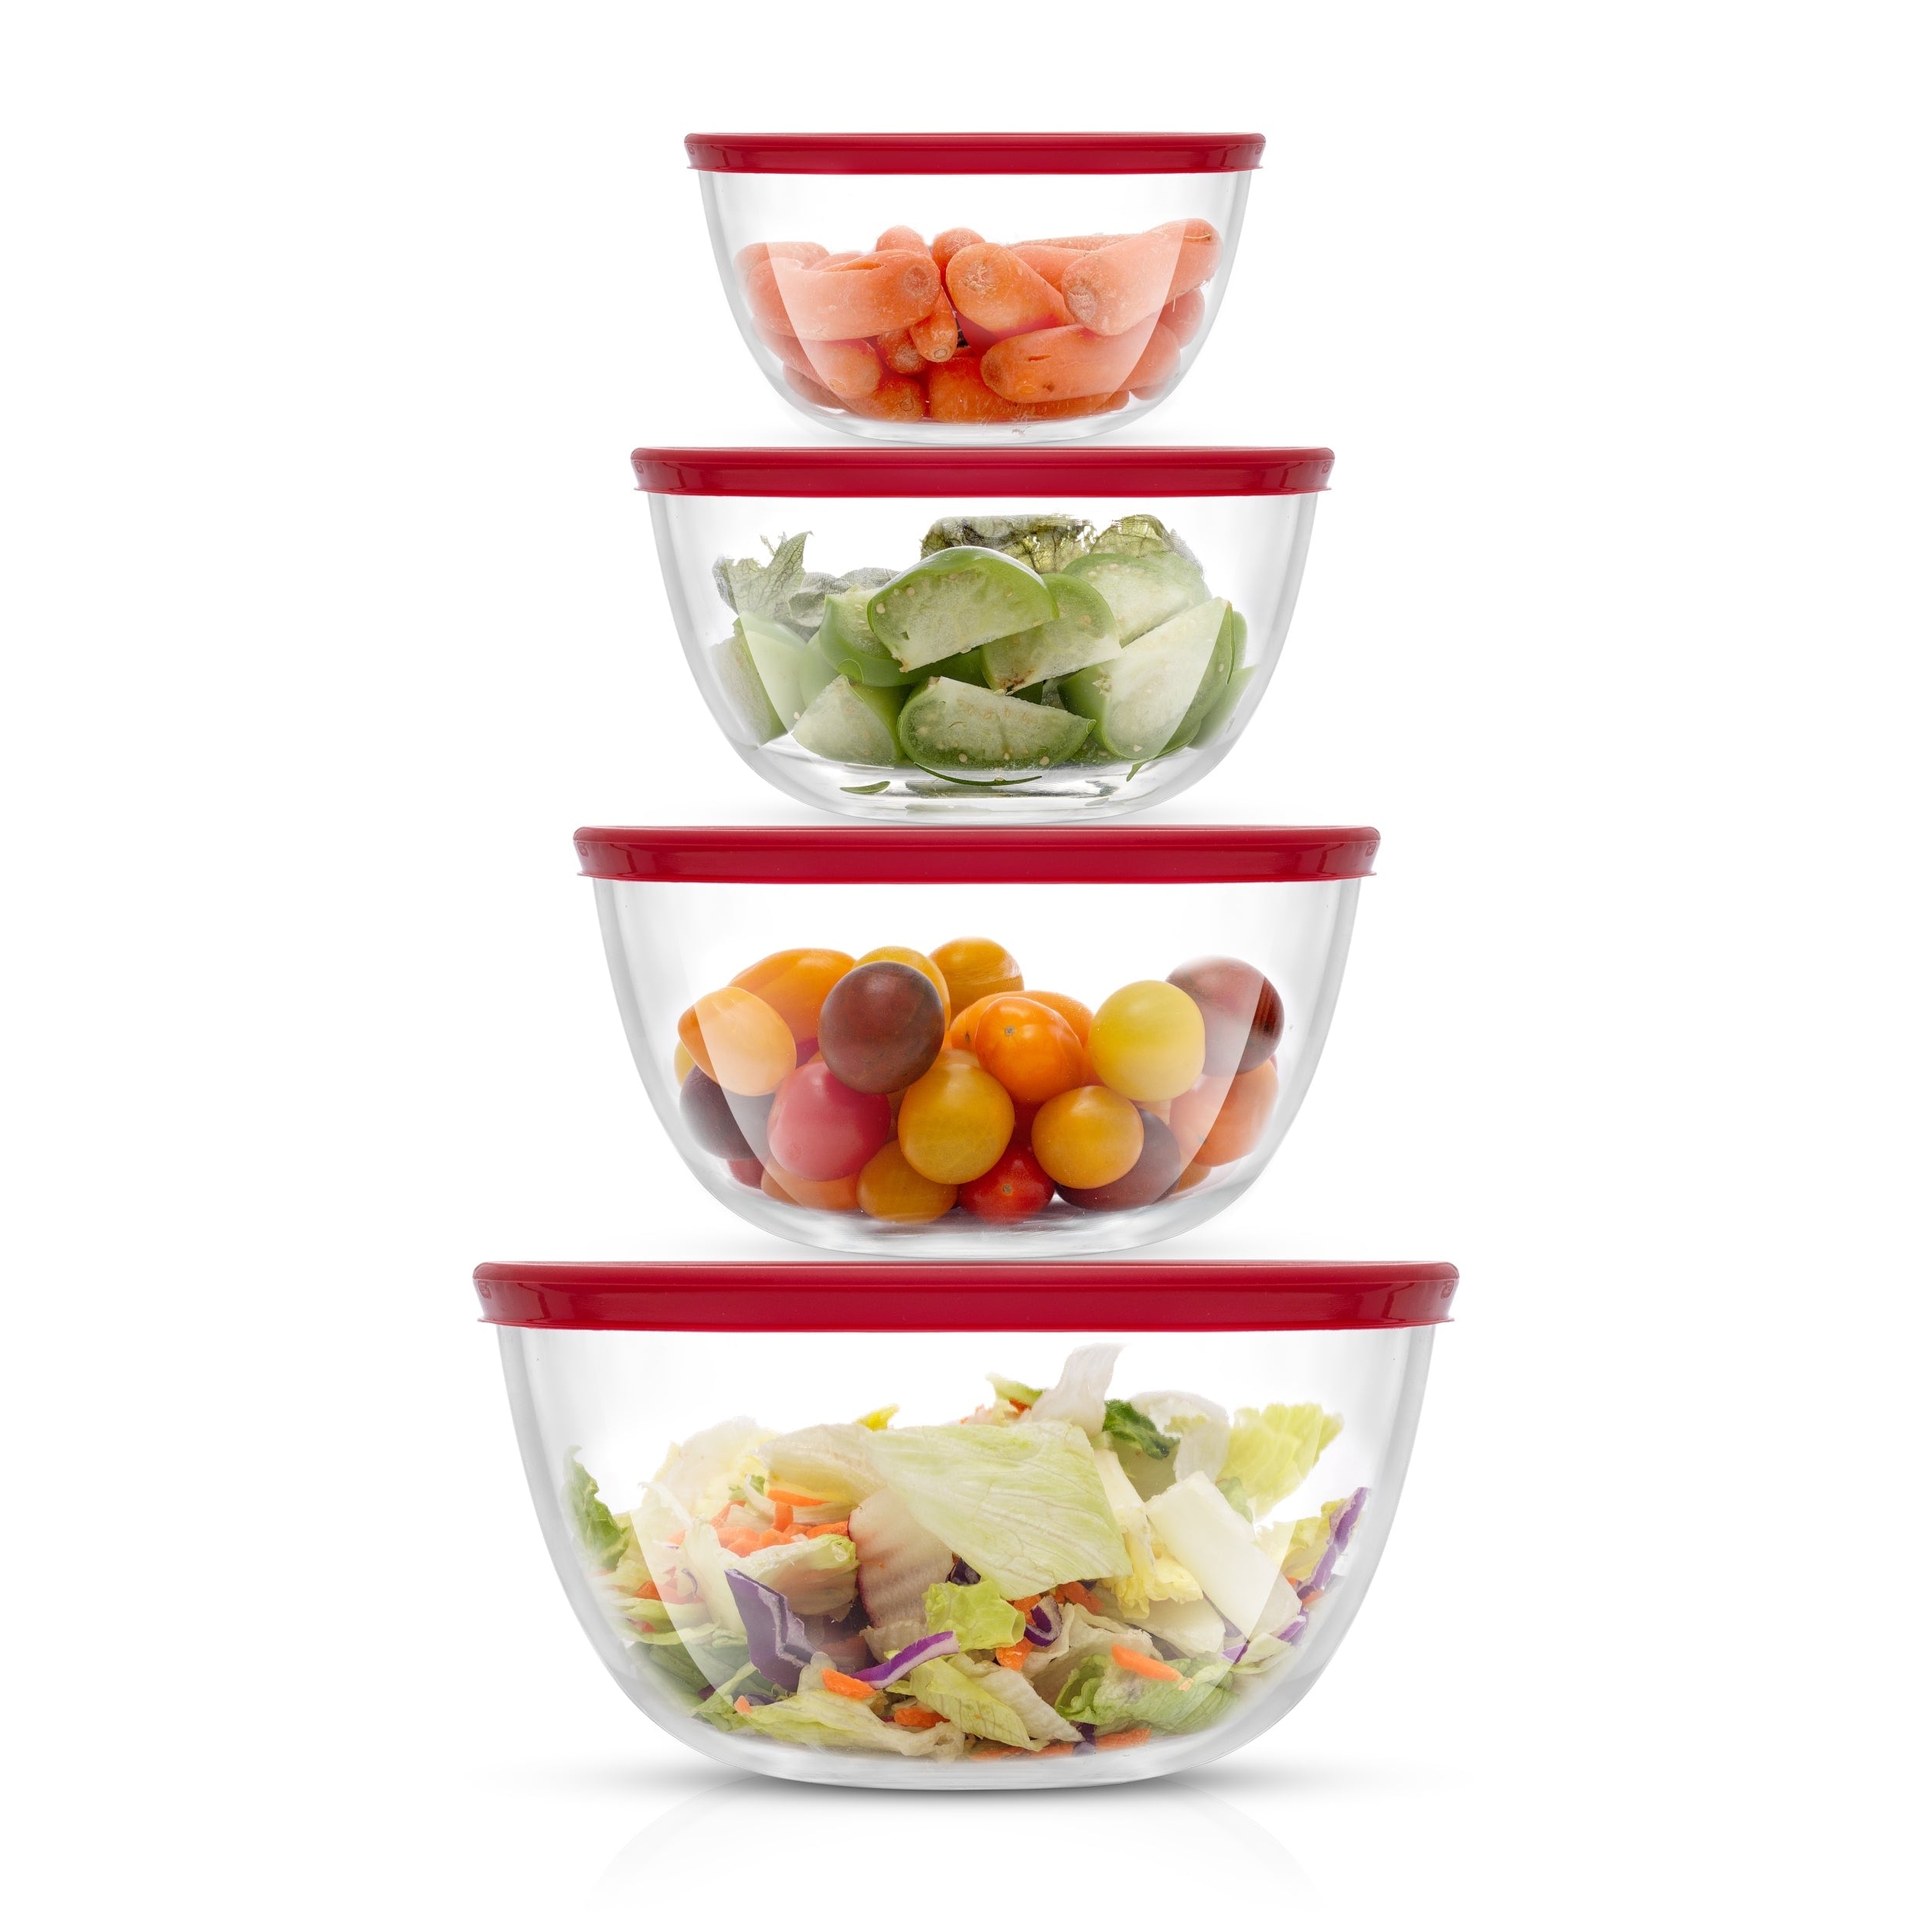 https://ak1.ostkcdn.com/images/products/is/images/direct/df4984cf2ee3cb00d95192baa9fc2f4d895a585d/JoyFul-4-Glass-Mixing-Bowls-With-Lids---Red.jpg